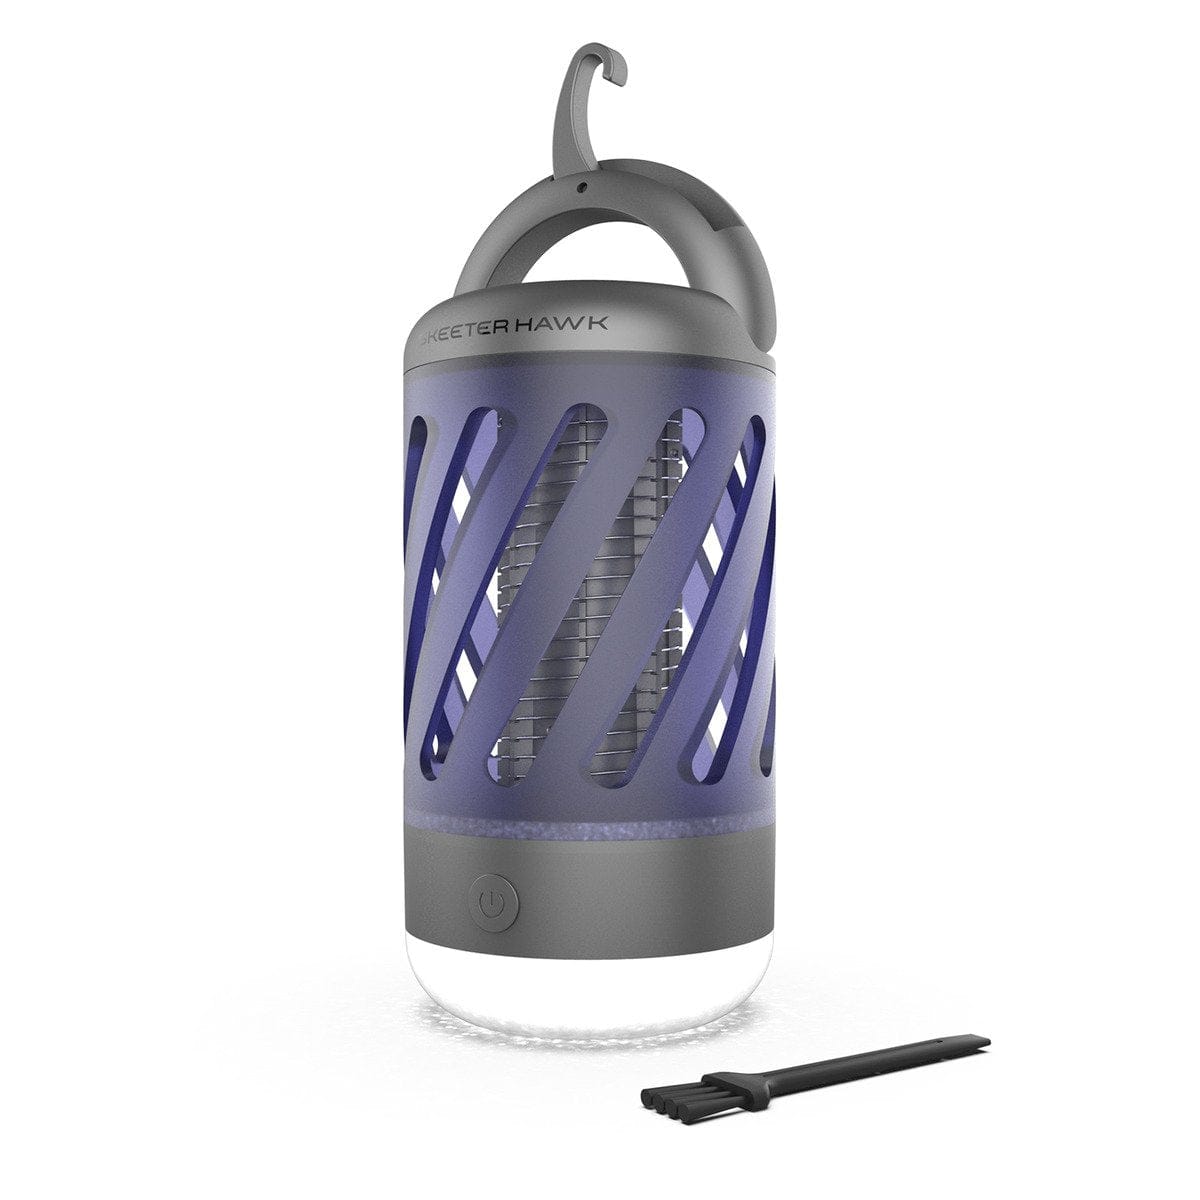 Personal Mosquito Zapper and Lantern by Skeeter Hawk Skeeter Hawk insect repellent